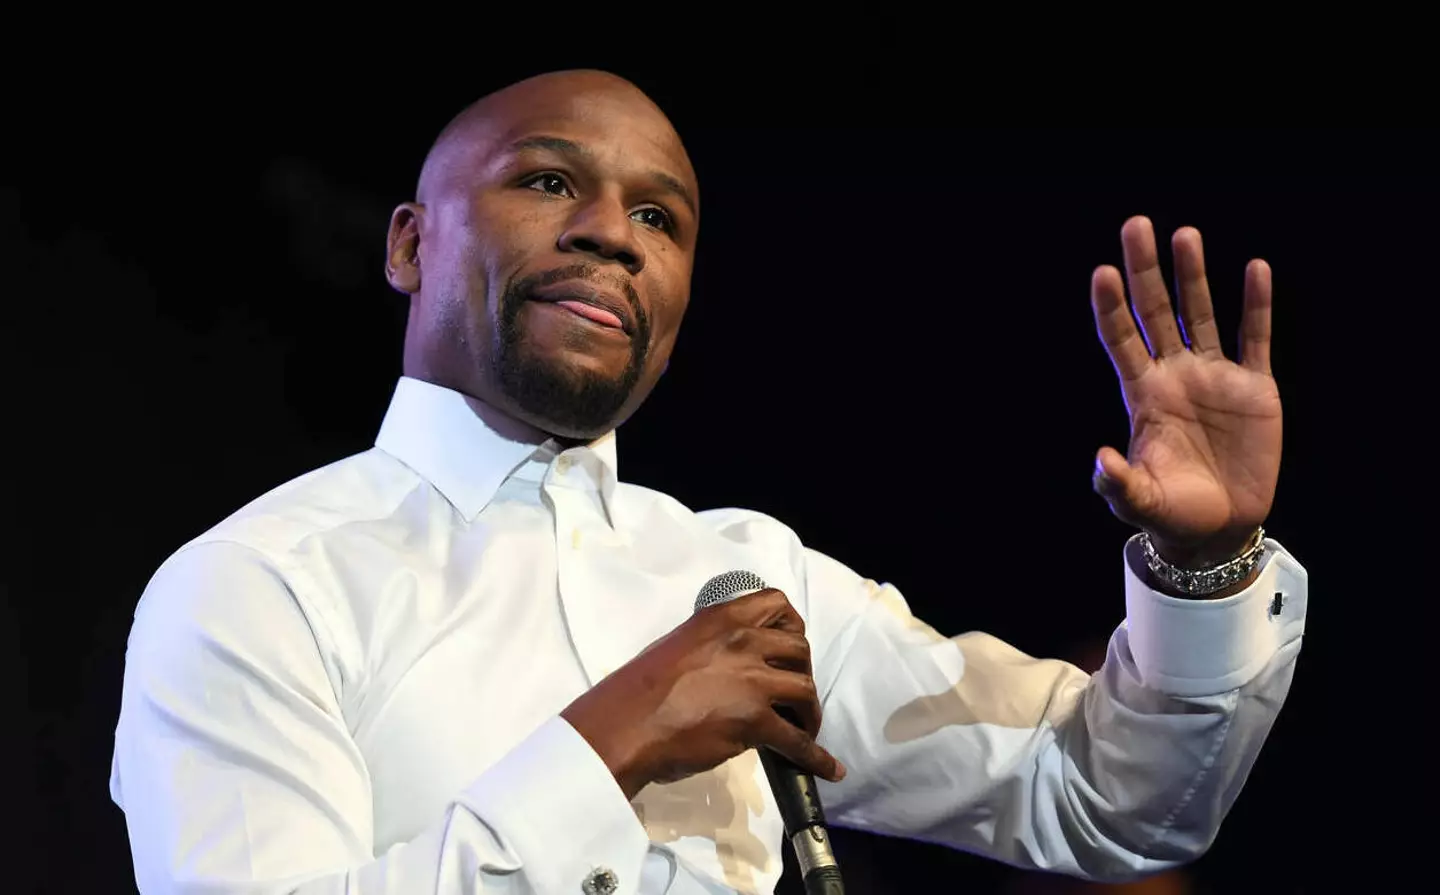 Floyd Mayweather responds to 50 cent's Harry Potter reading request.